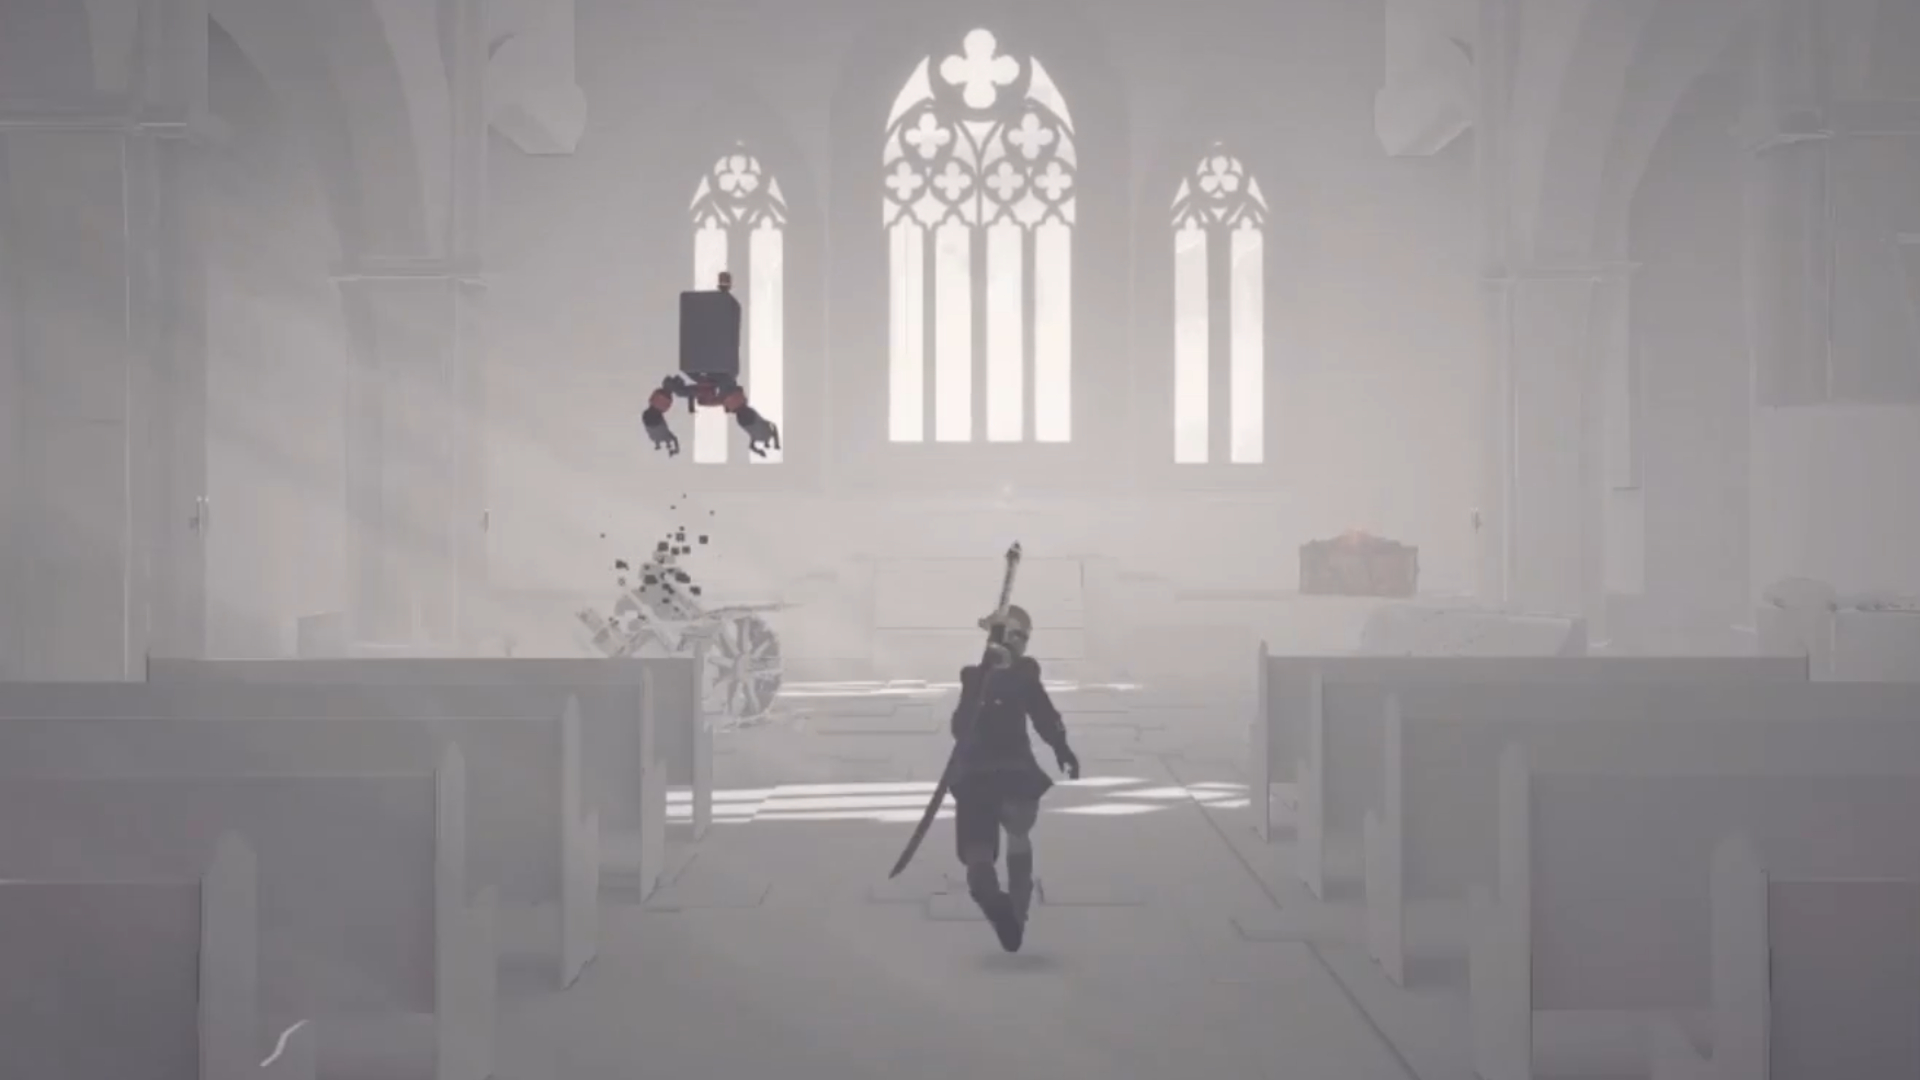 Lucht Plunderen blaas gat The great Nier: Automata church mystery has been solved | PC Gamer